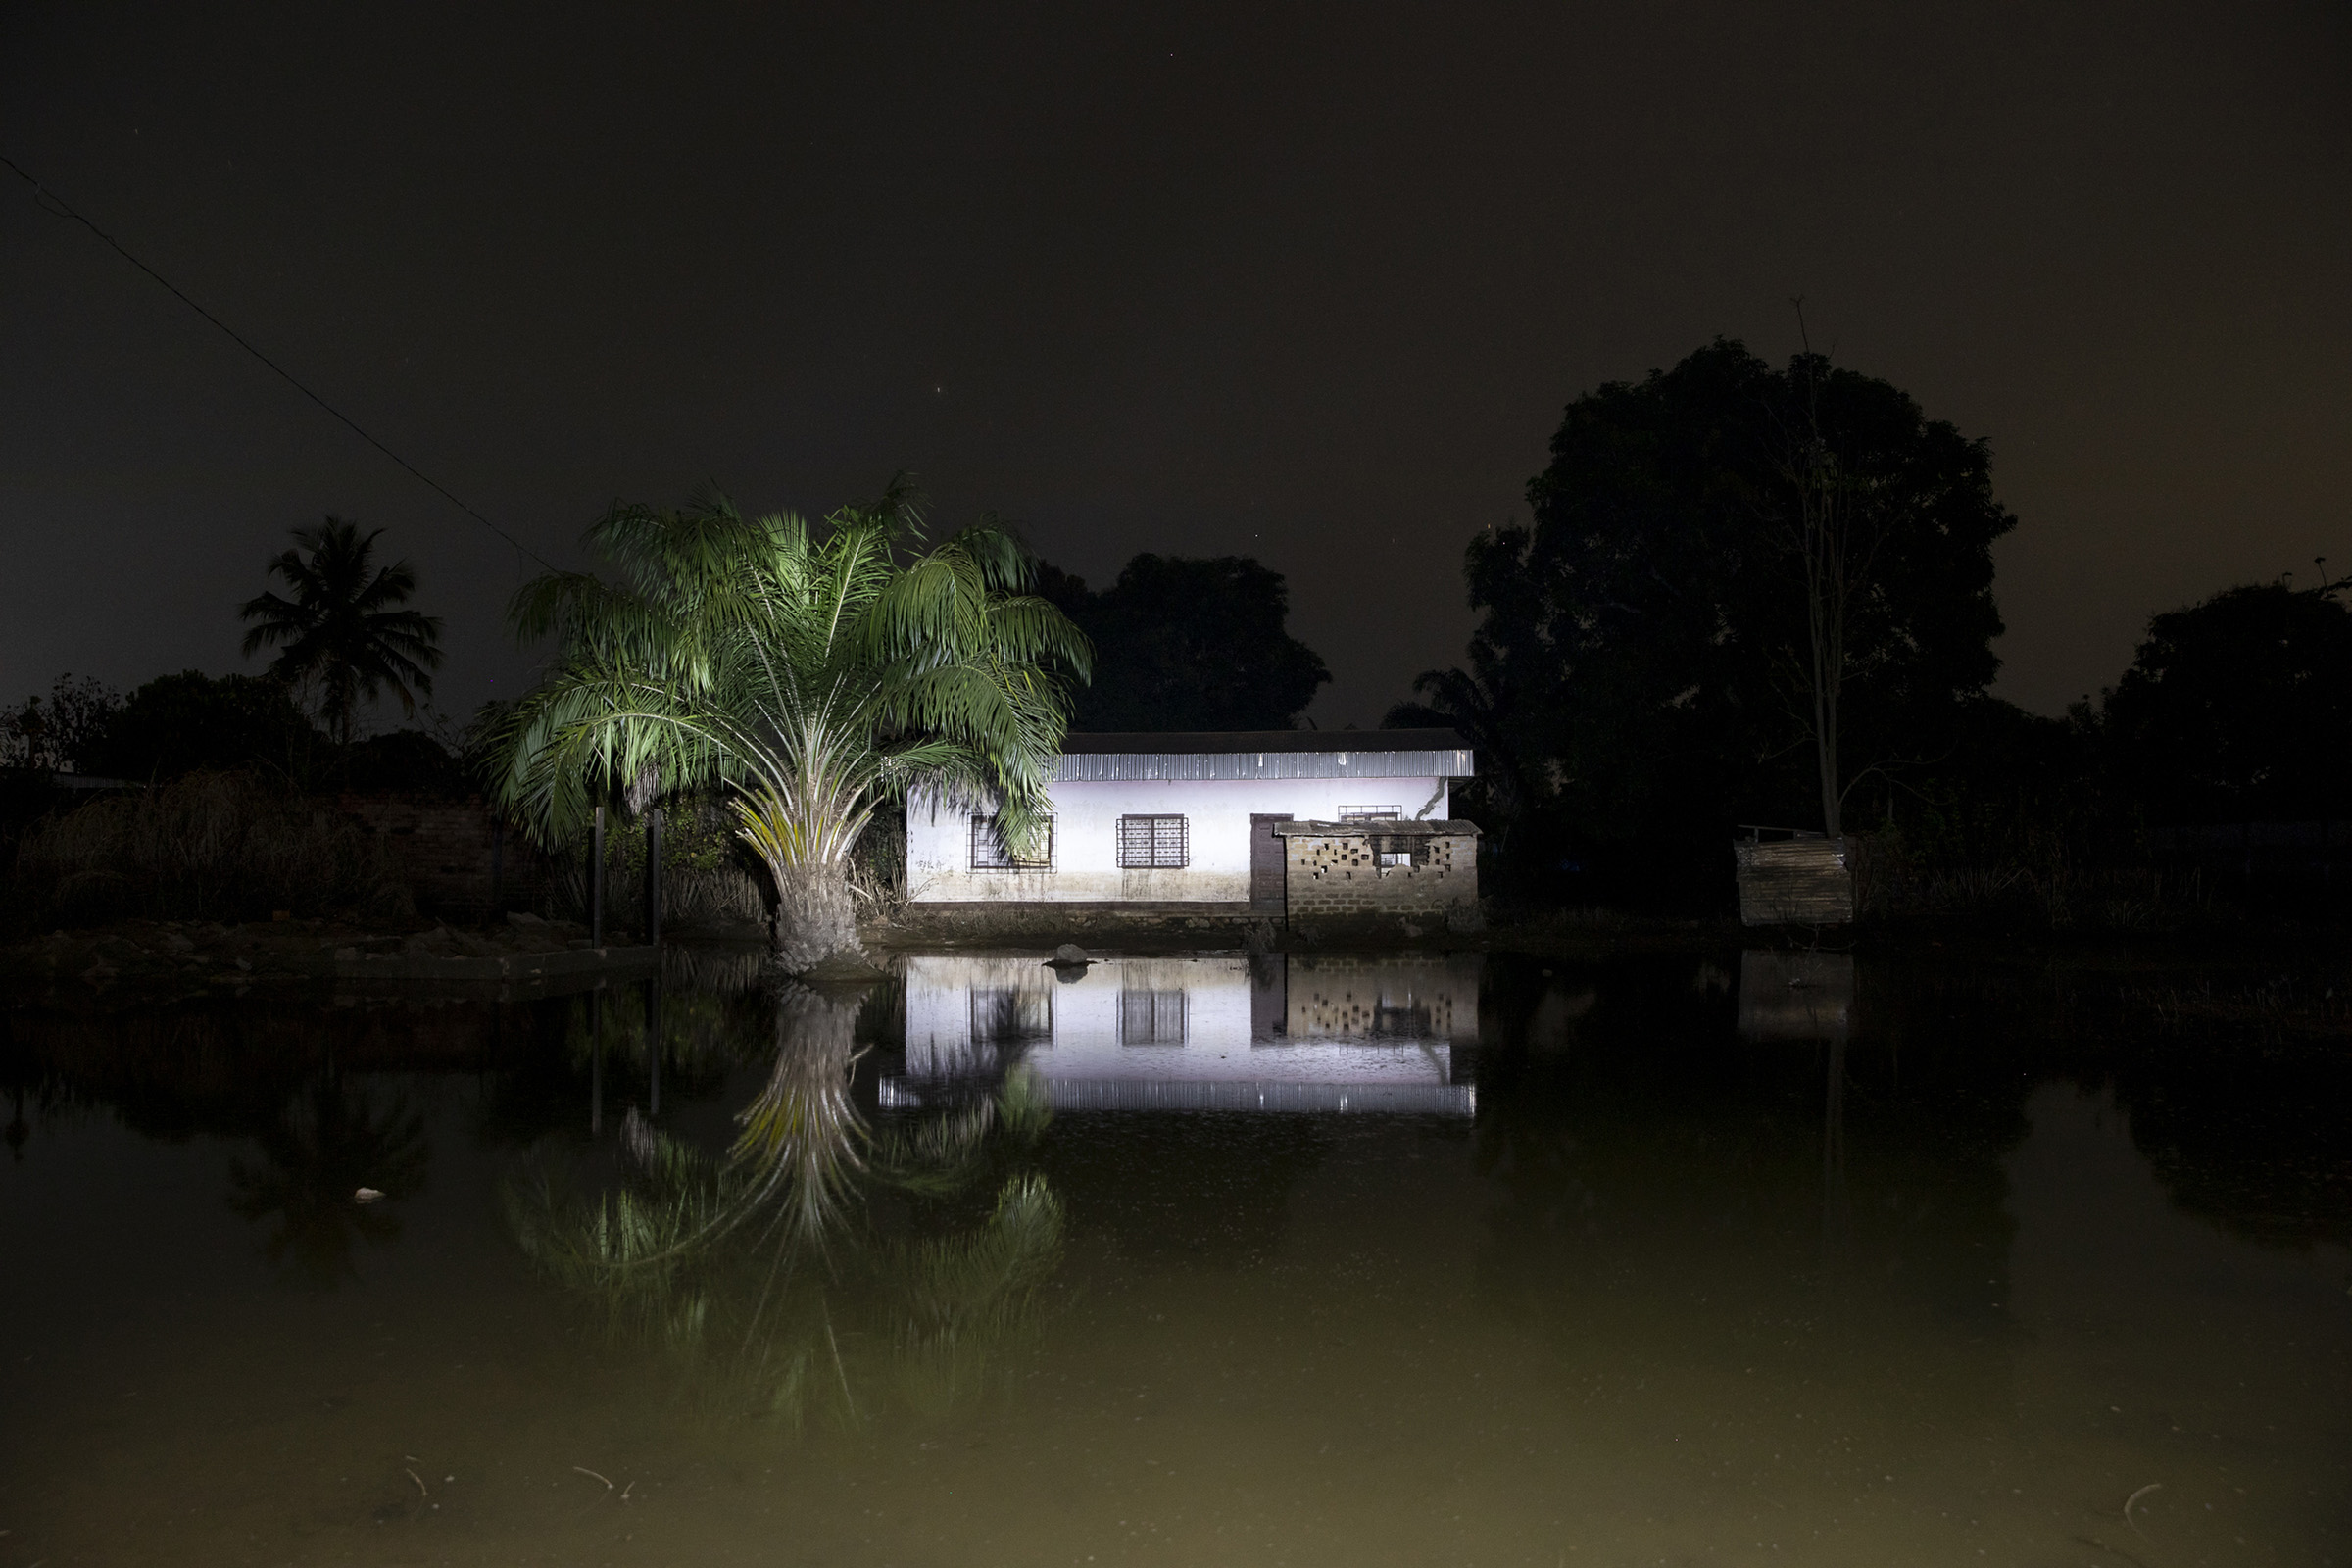 A house is seen at night in a flooded neighbourhood of Bangui, capital of the Central African Republic, on Nov. 22, 2019 during a night patrol. (Adrienne Surprenant—Greenpeace)